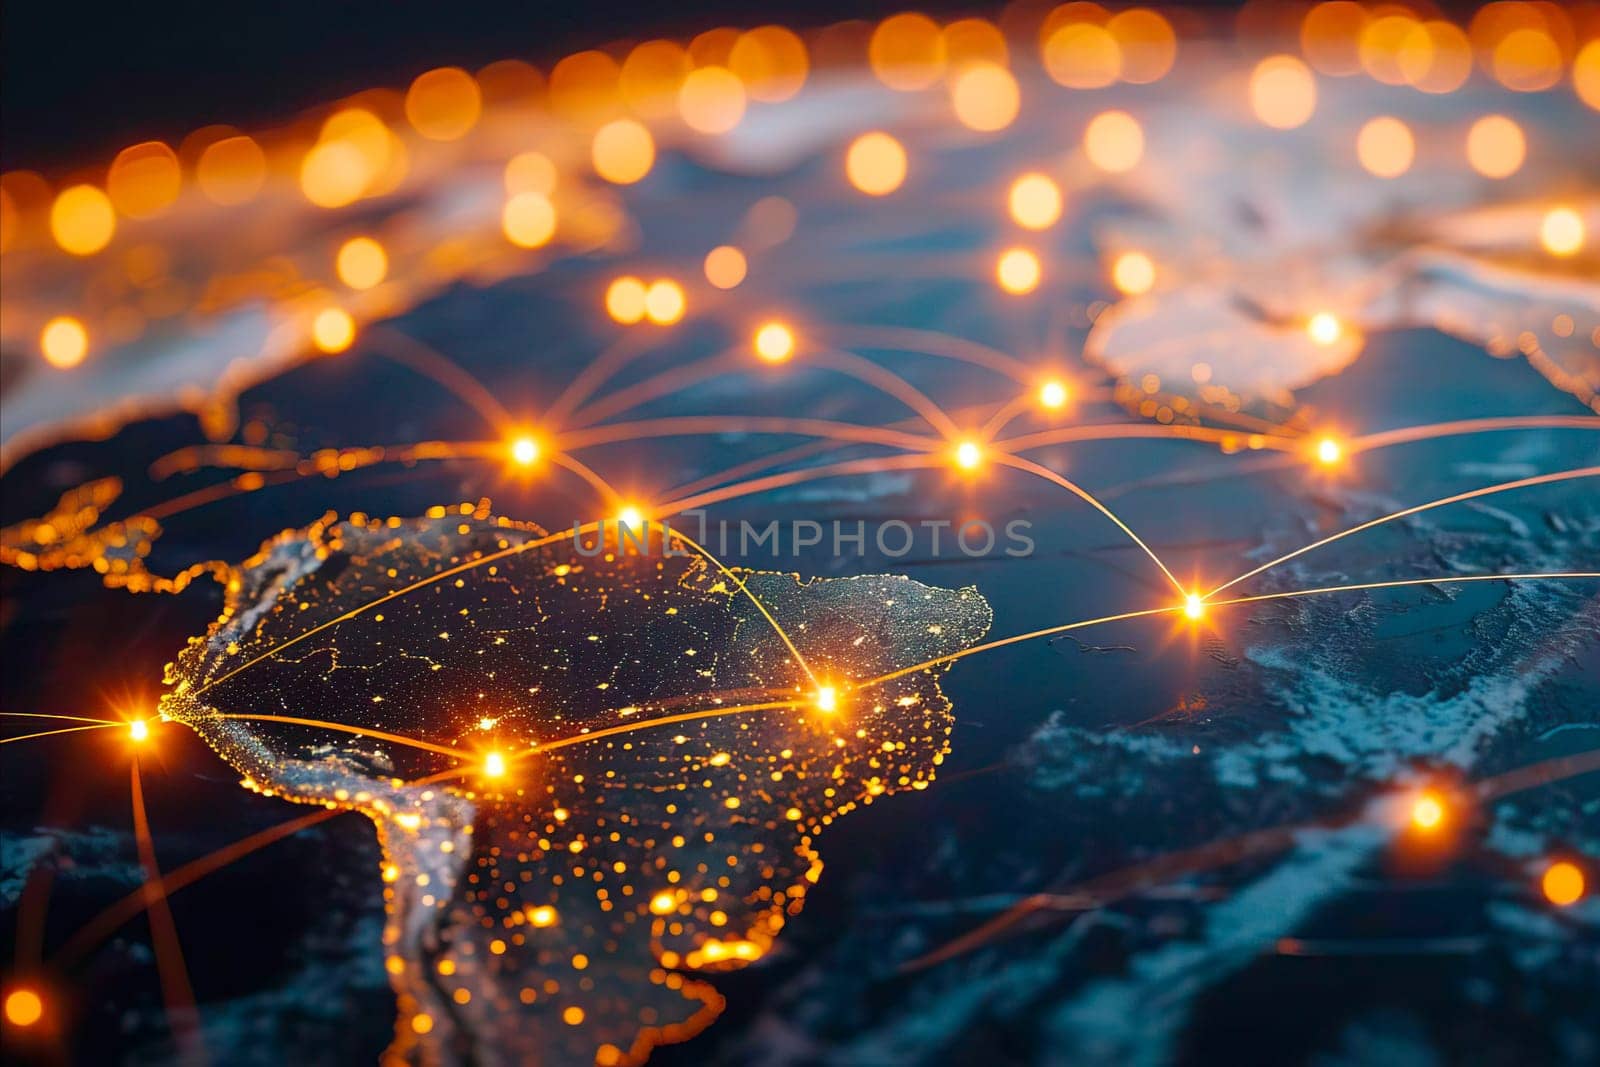 A Fascinating Illuminated Map of the World With Connection Lines. by vladimka